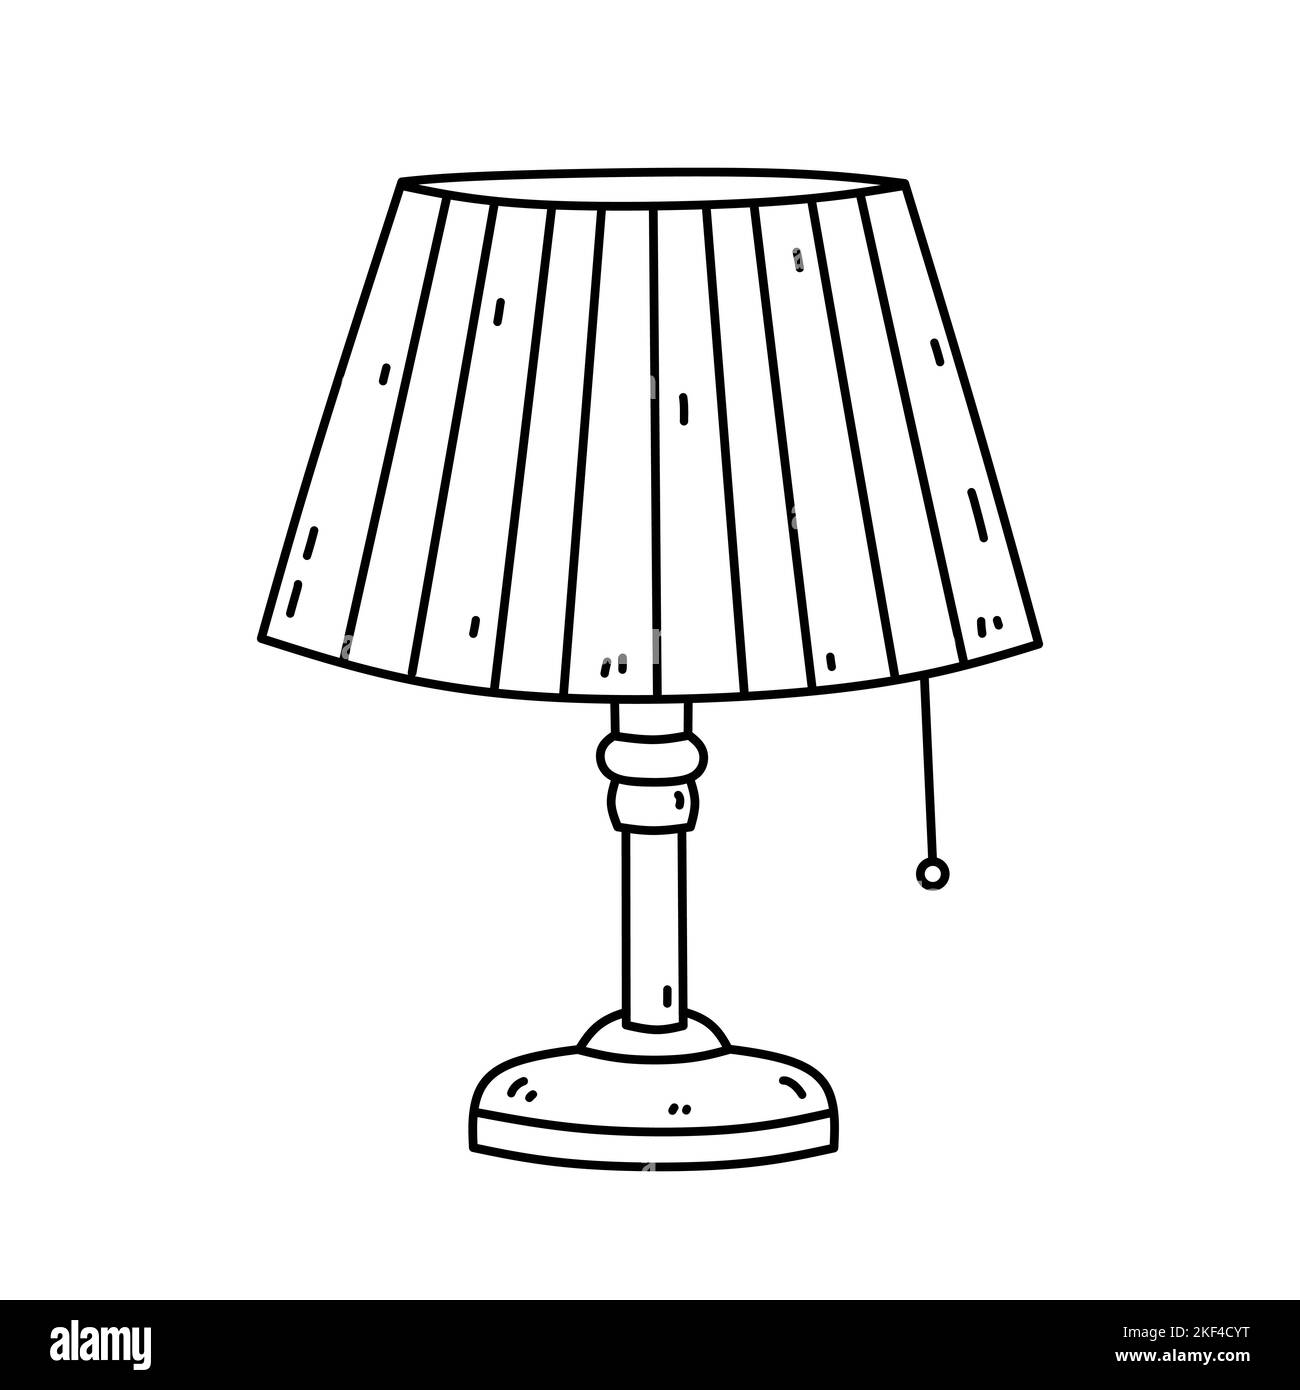 Pencil Drawing with Table Lamp with Lampshade Stock Illustration   Illustration of lampshade decoration 147496817